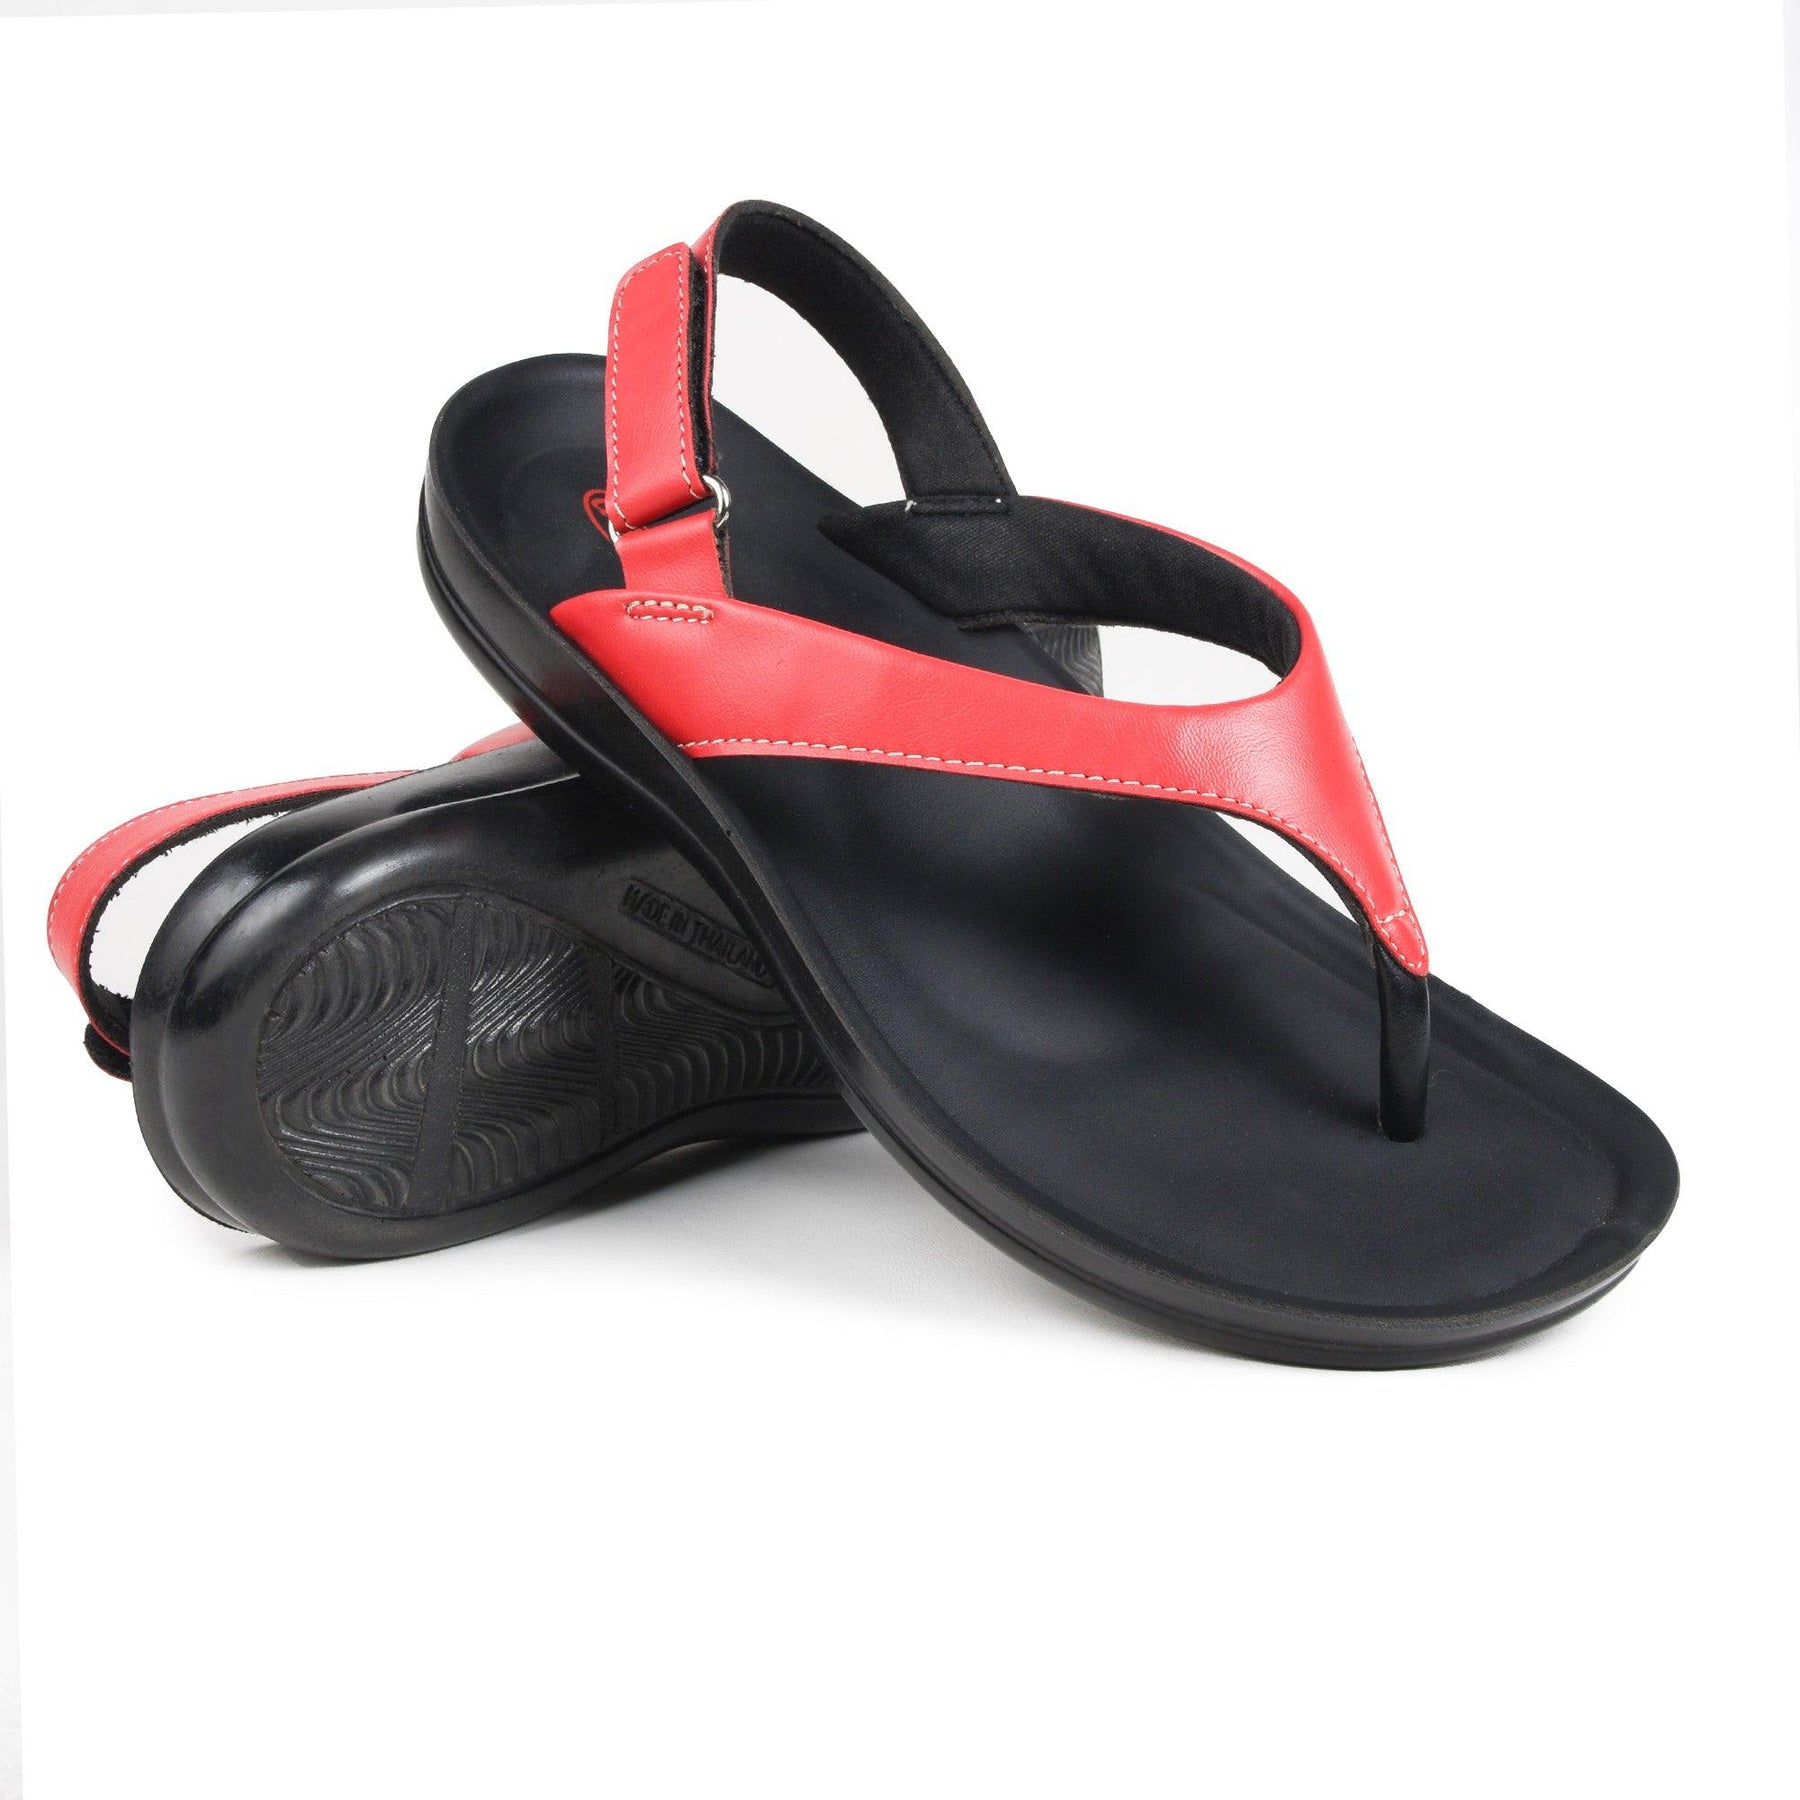 Aerothotic - Aura womens comfortable and supportive sandals ...